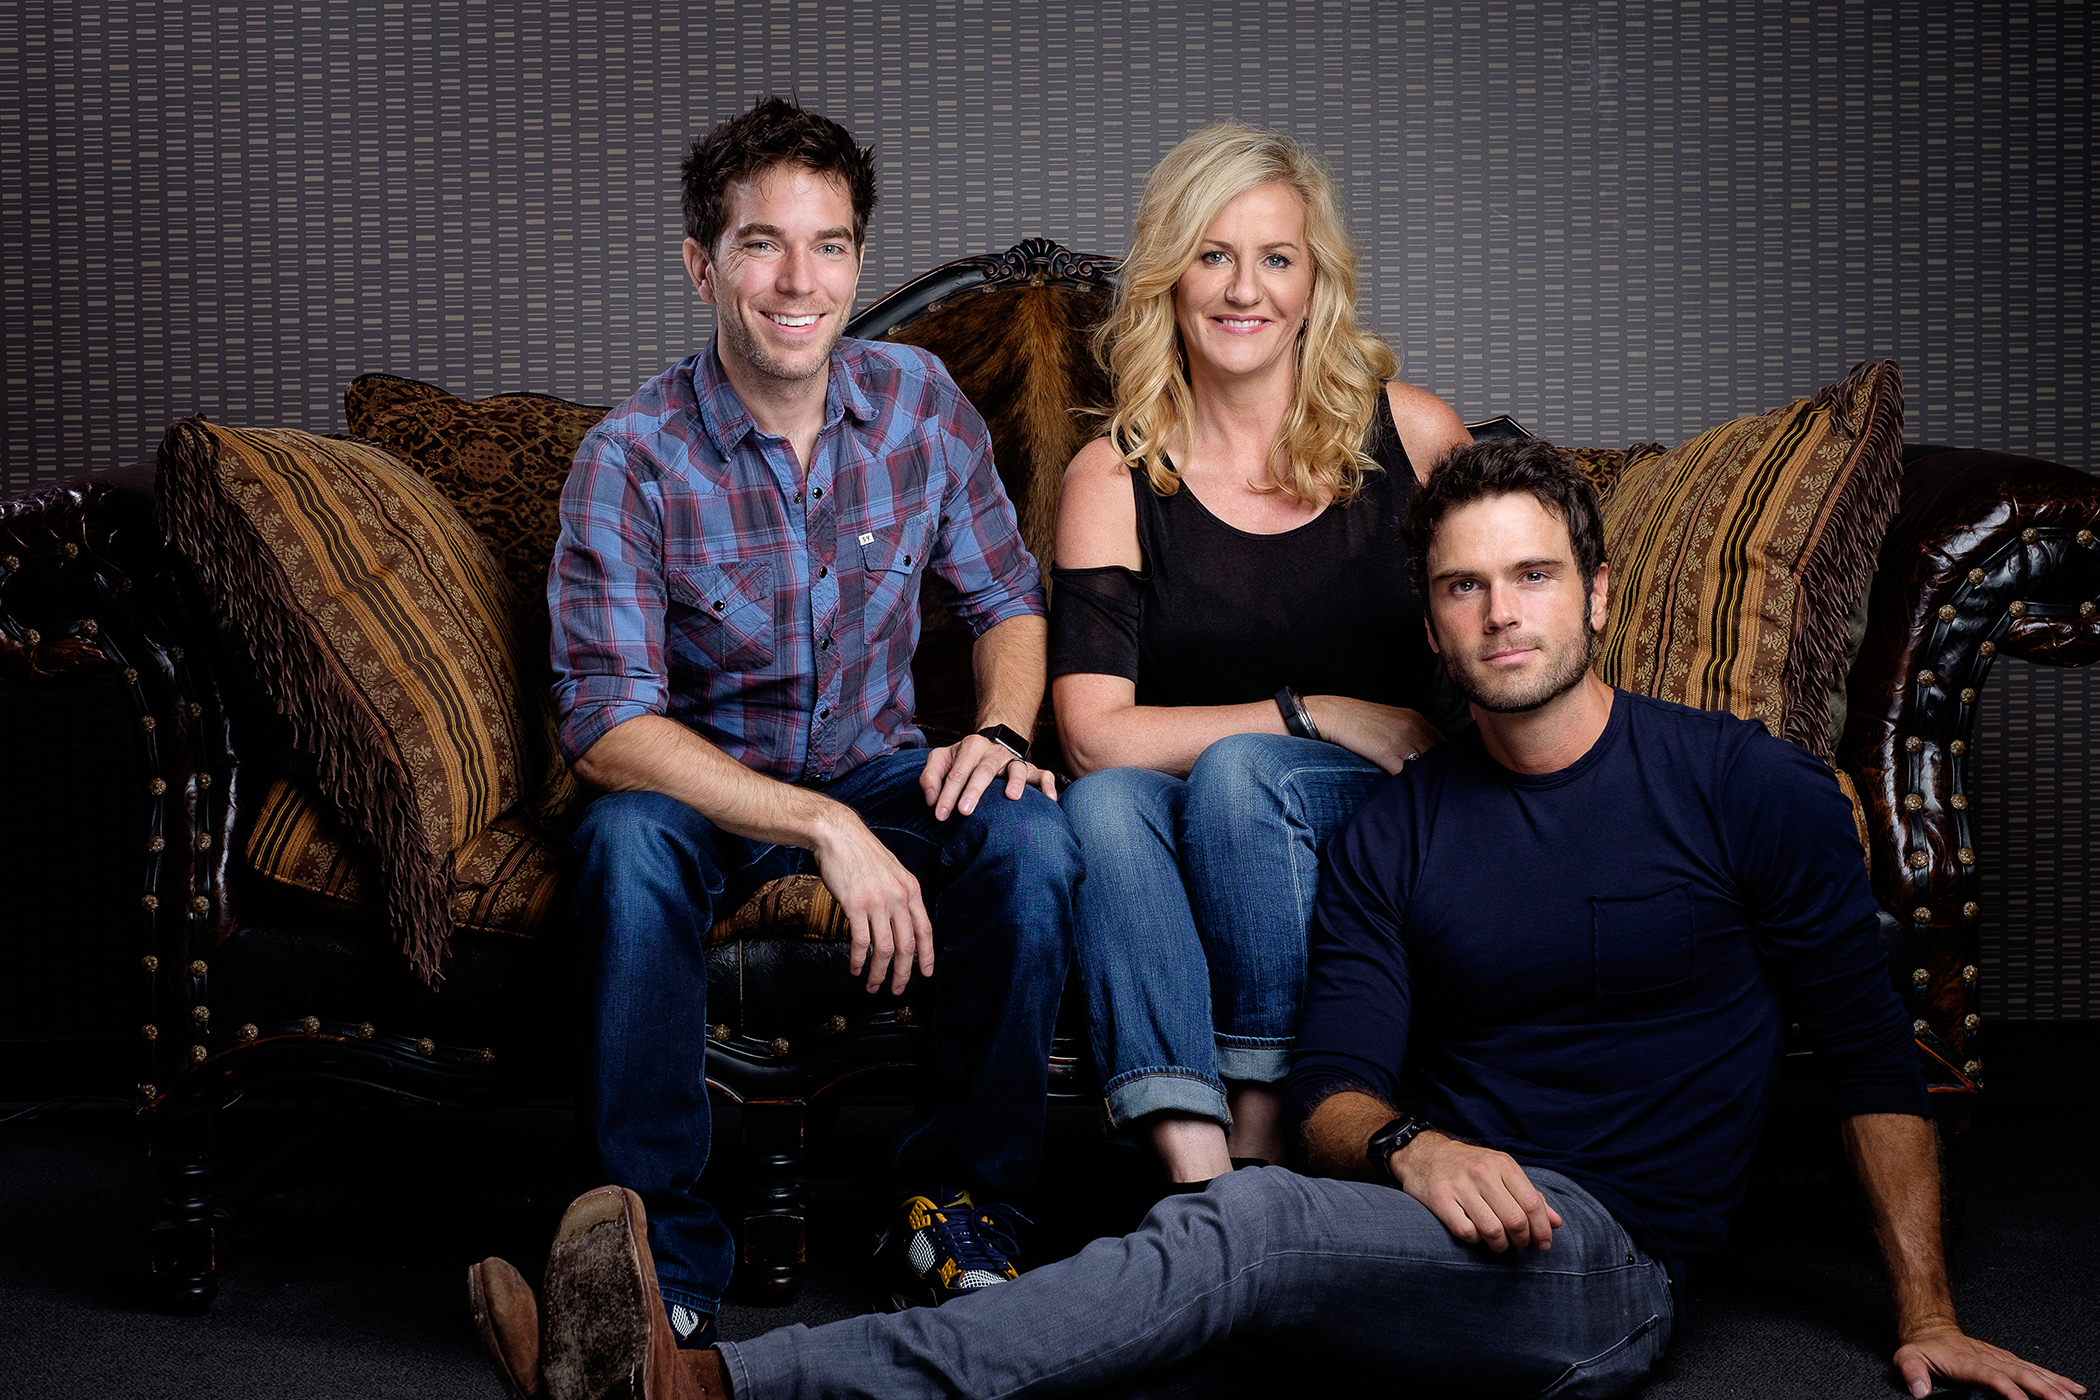 New Addition Ty Bentli Joins Kelly Ford and Chuck Wicks on “America’s Morning Show”